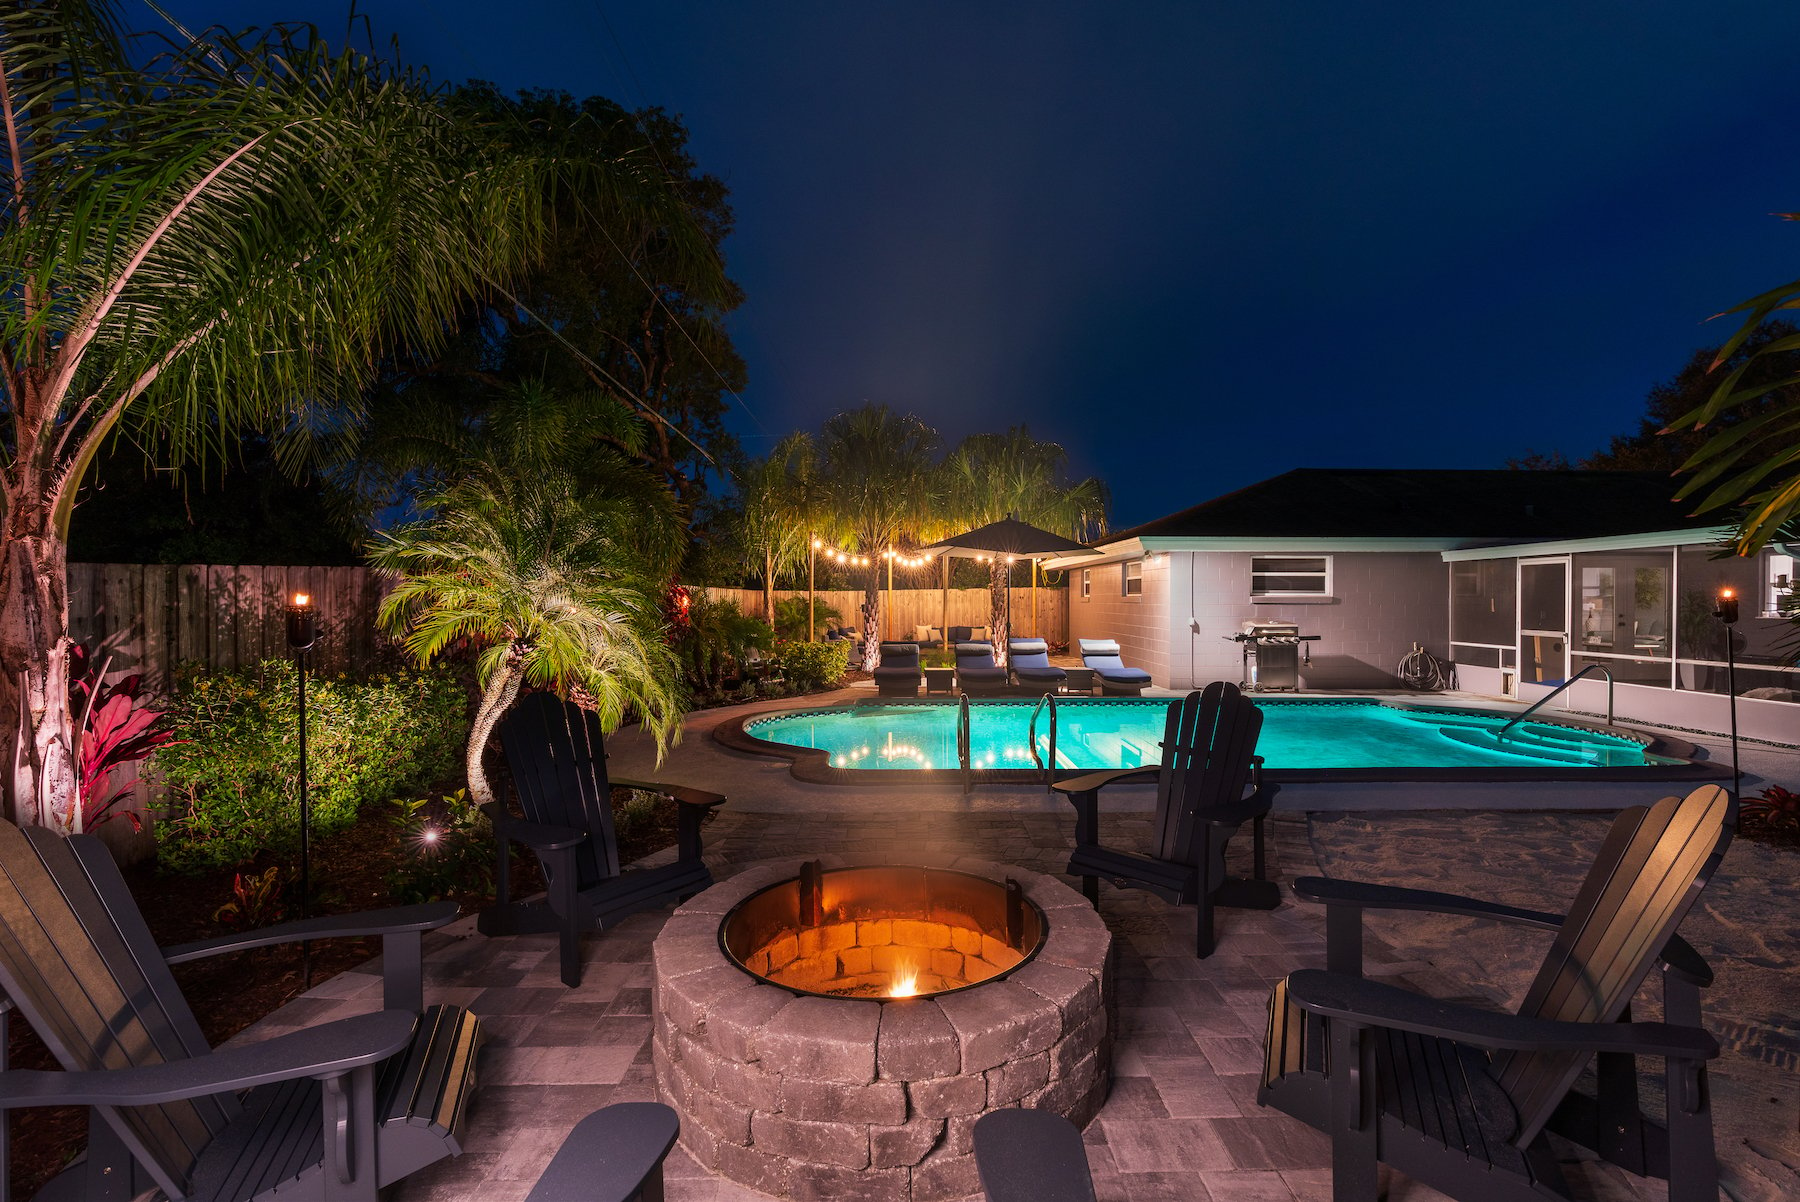 outdoor fire pit on patio with landscape pool and fence